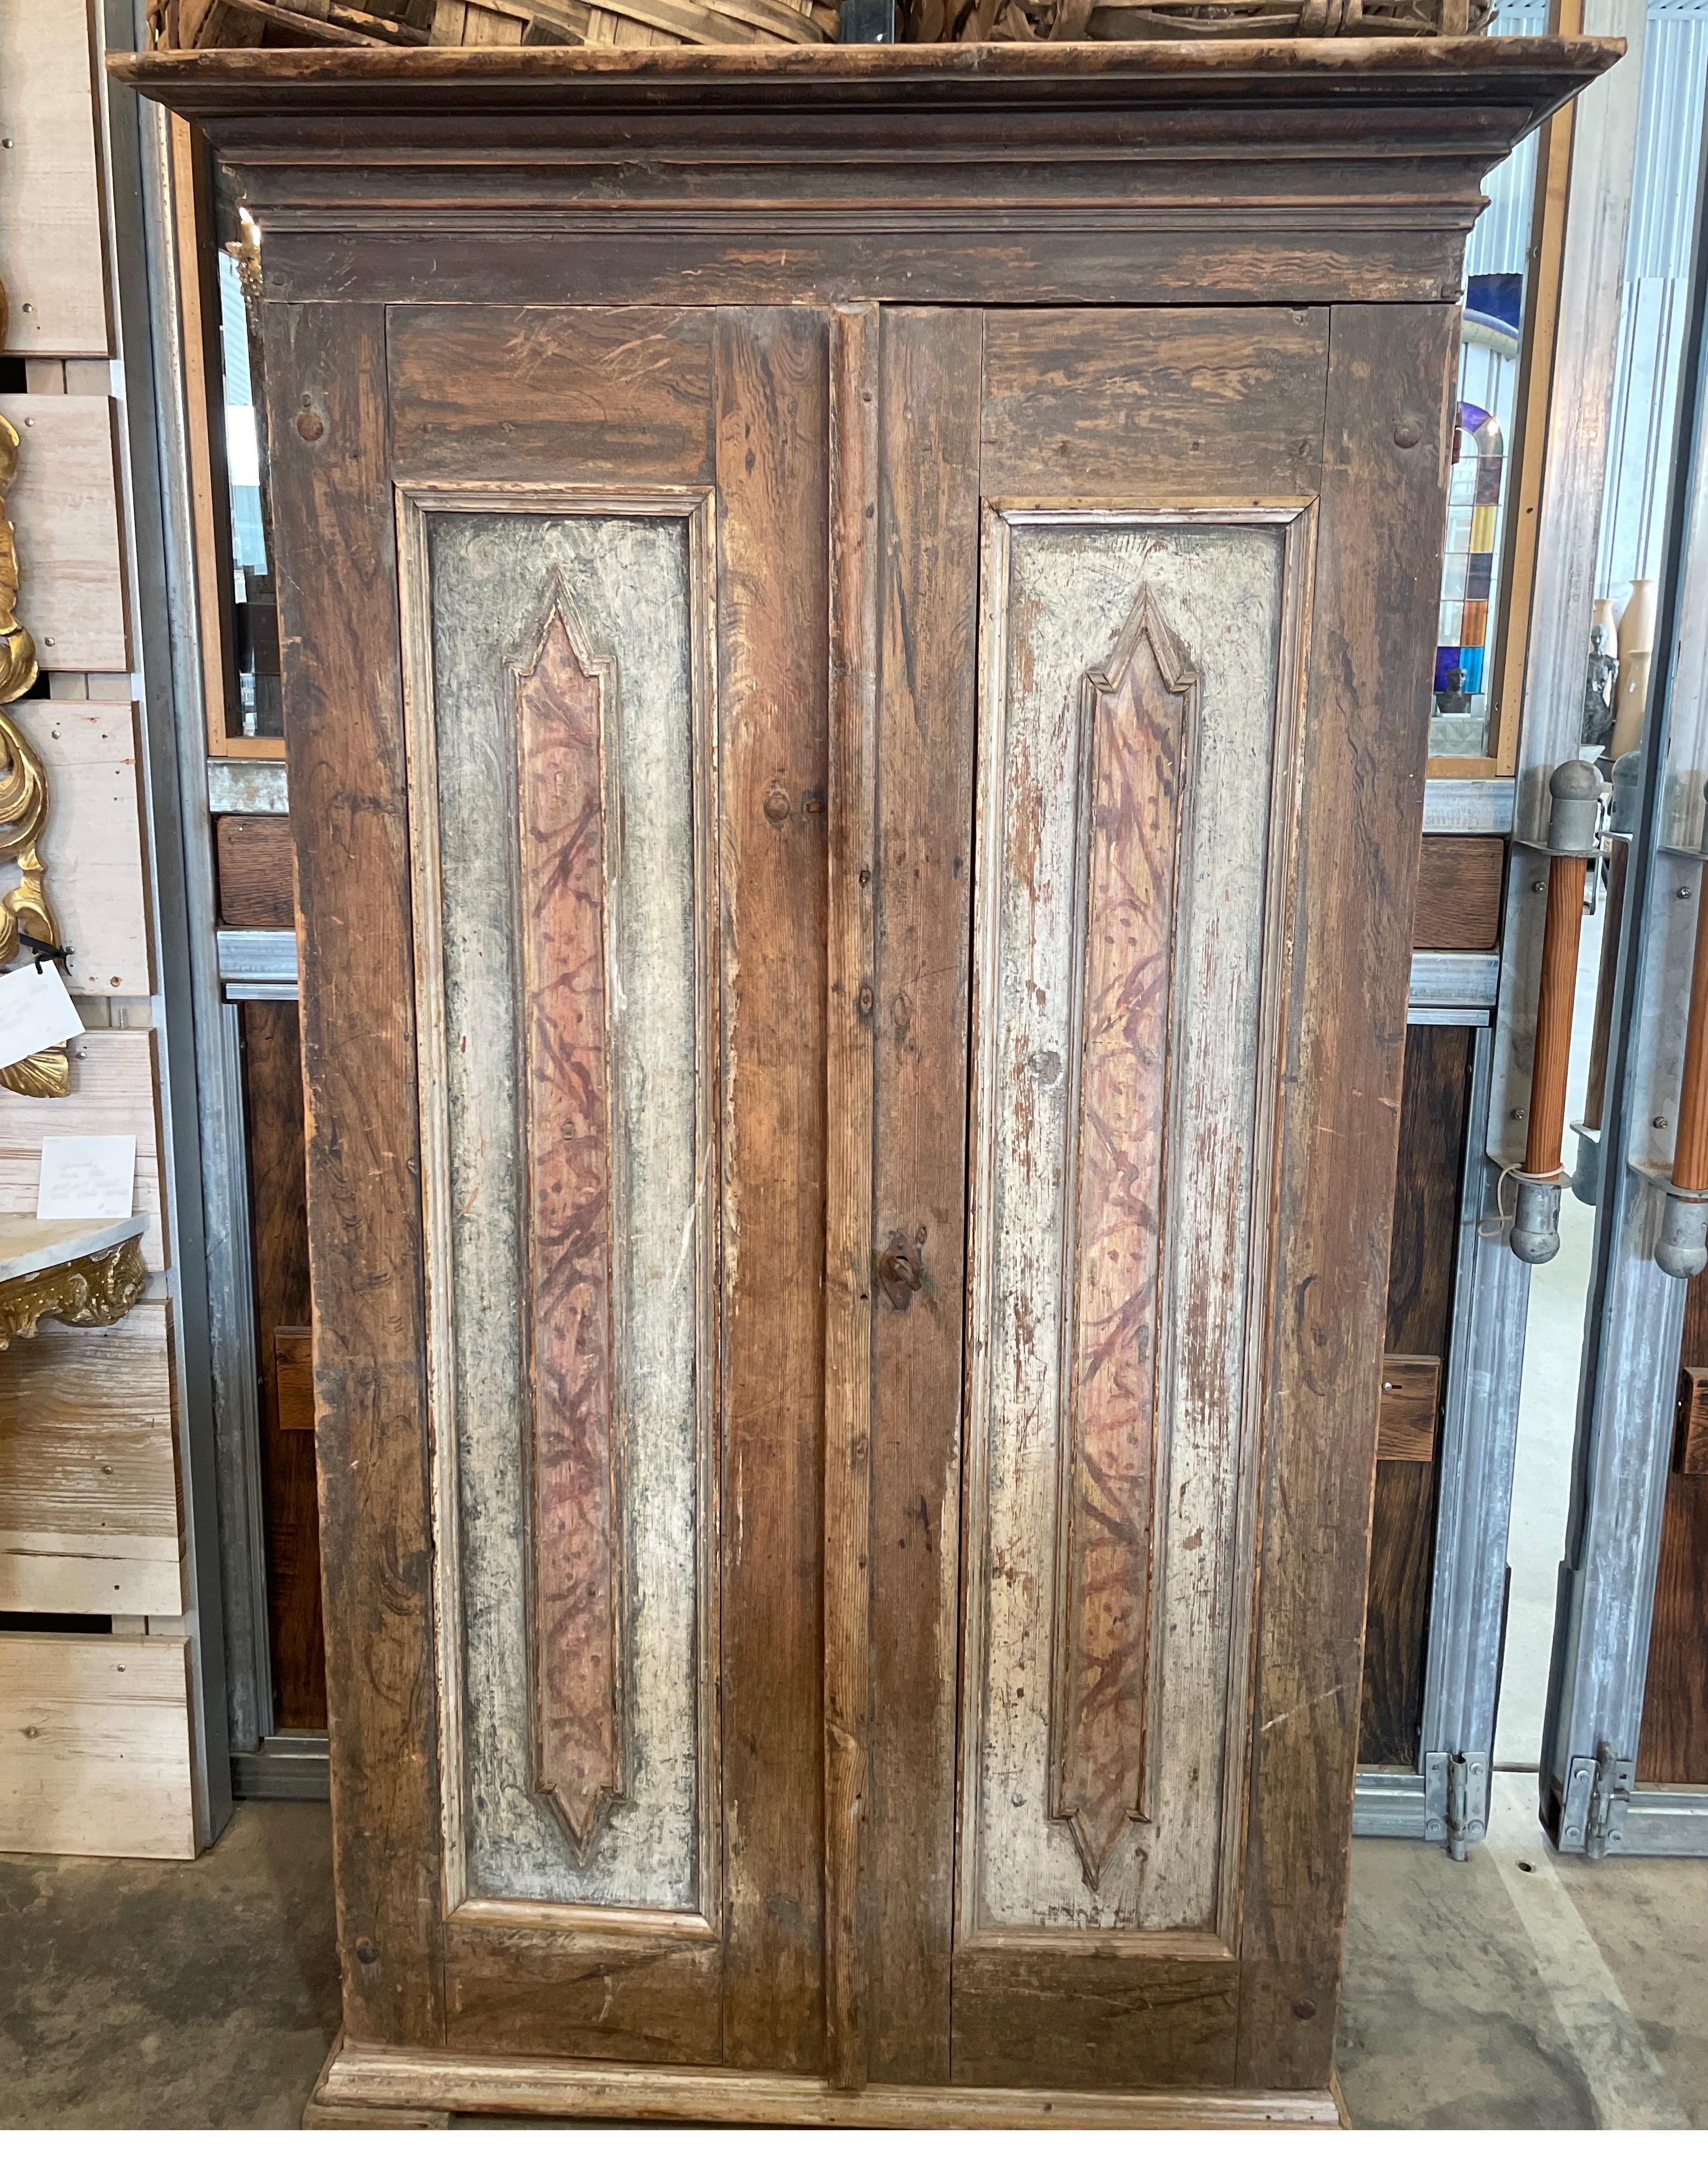 This is such a handsome painted cabinet originated from Sweden. It has amazing hardware and patina with faux marble paint all over.  It's outfitted with four built in shelves.  On the right hand side of the inside right door is the date 1800 faintly